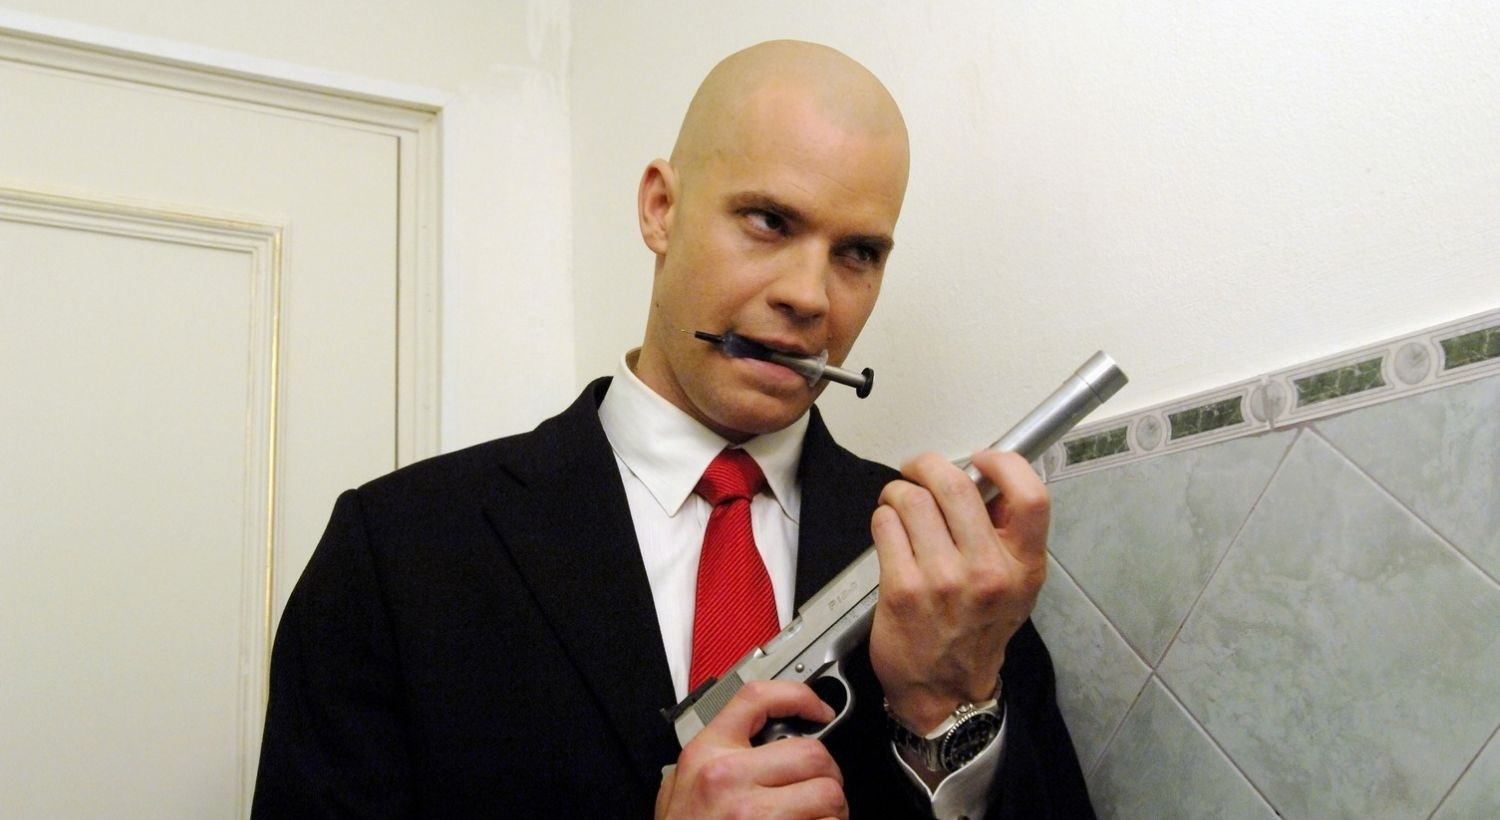 timothy olyphant as hitman puts a silencer on his pistol